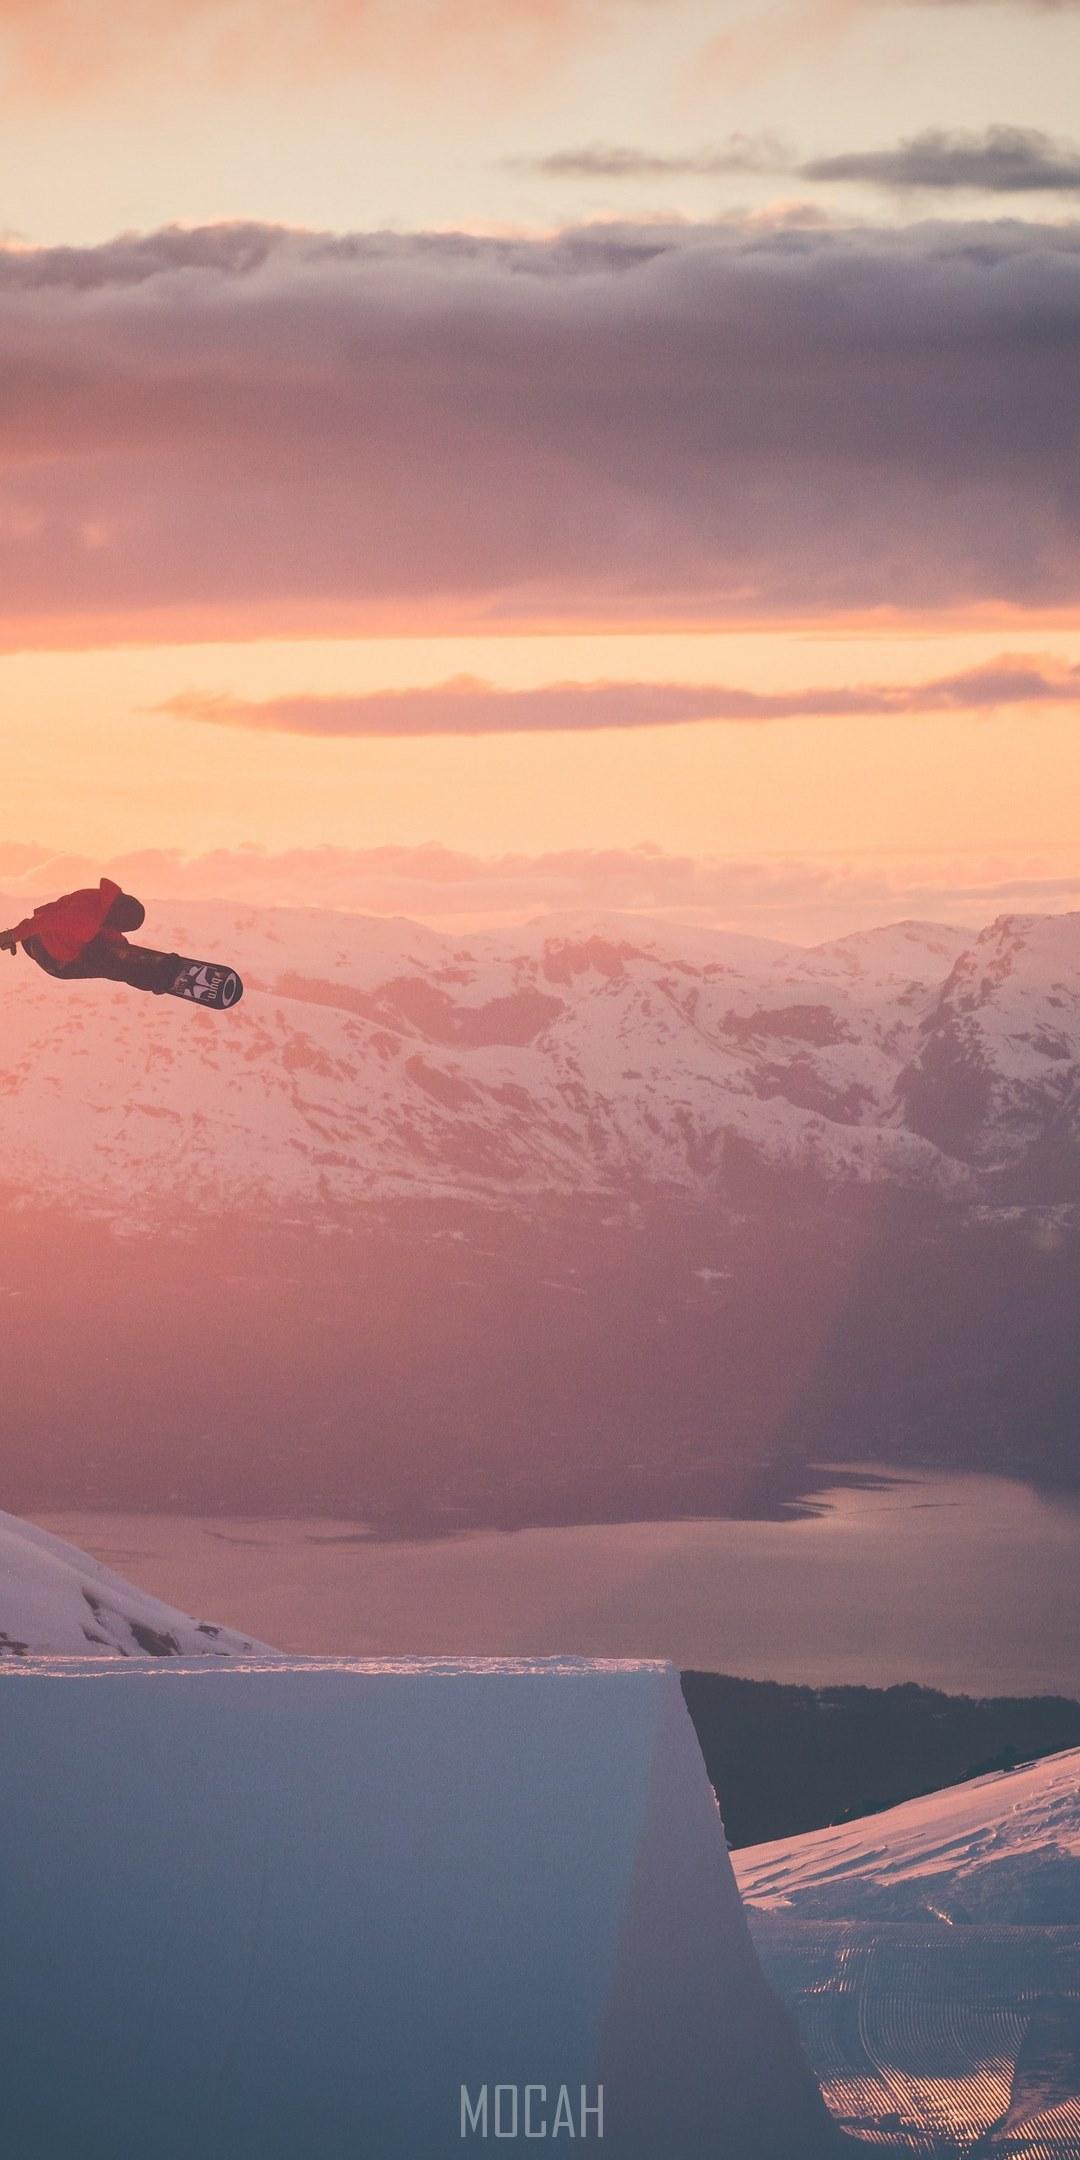 HD wallpaper, Snowboarder In Flight, A Snowboarder Is Airborne Surrounded By Golden Skies And Snowy Mountains, 1080X2160, Bq Aquaris X2 Pro Screensaver Hd